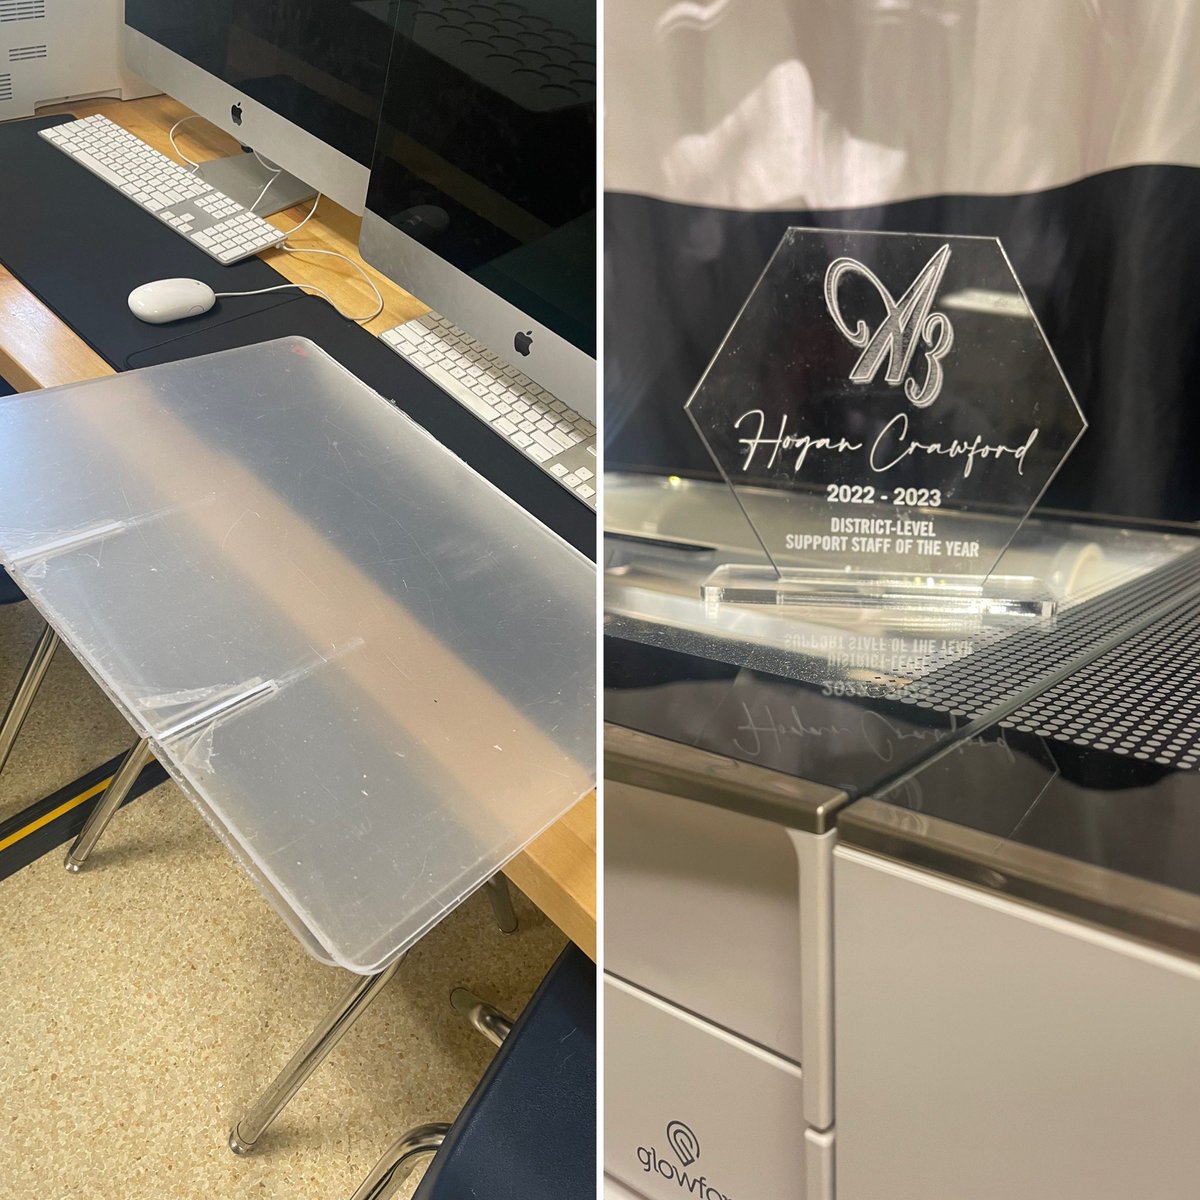 When you turn COVID plexi into awards using the @glowforge it gives all the feels. Thankful for our awesome IT team

#changingthevibe #glowforgeproject #teacherlife